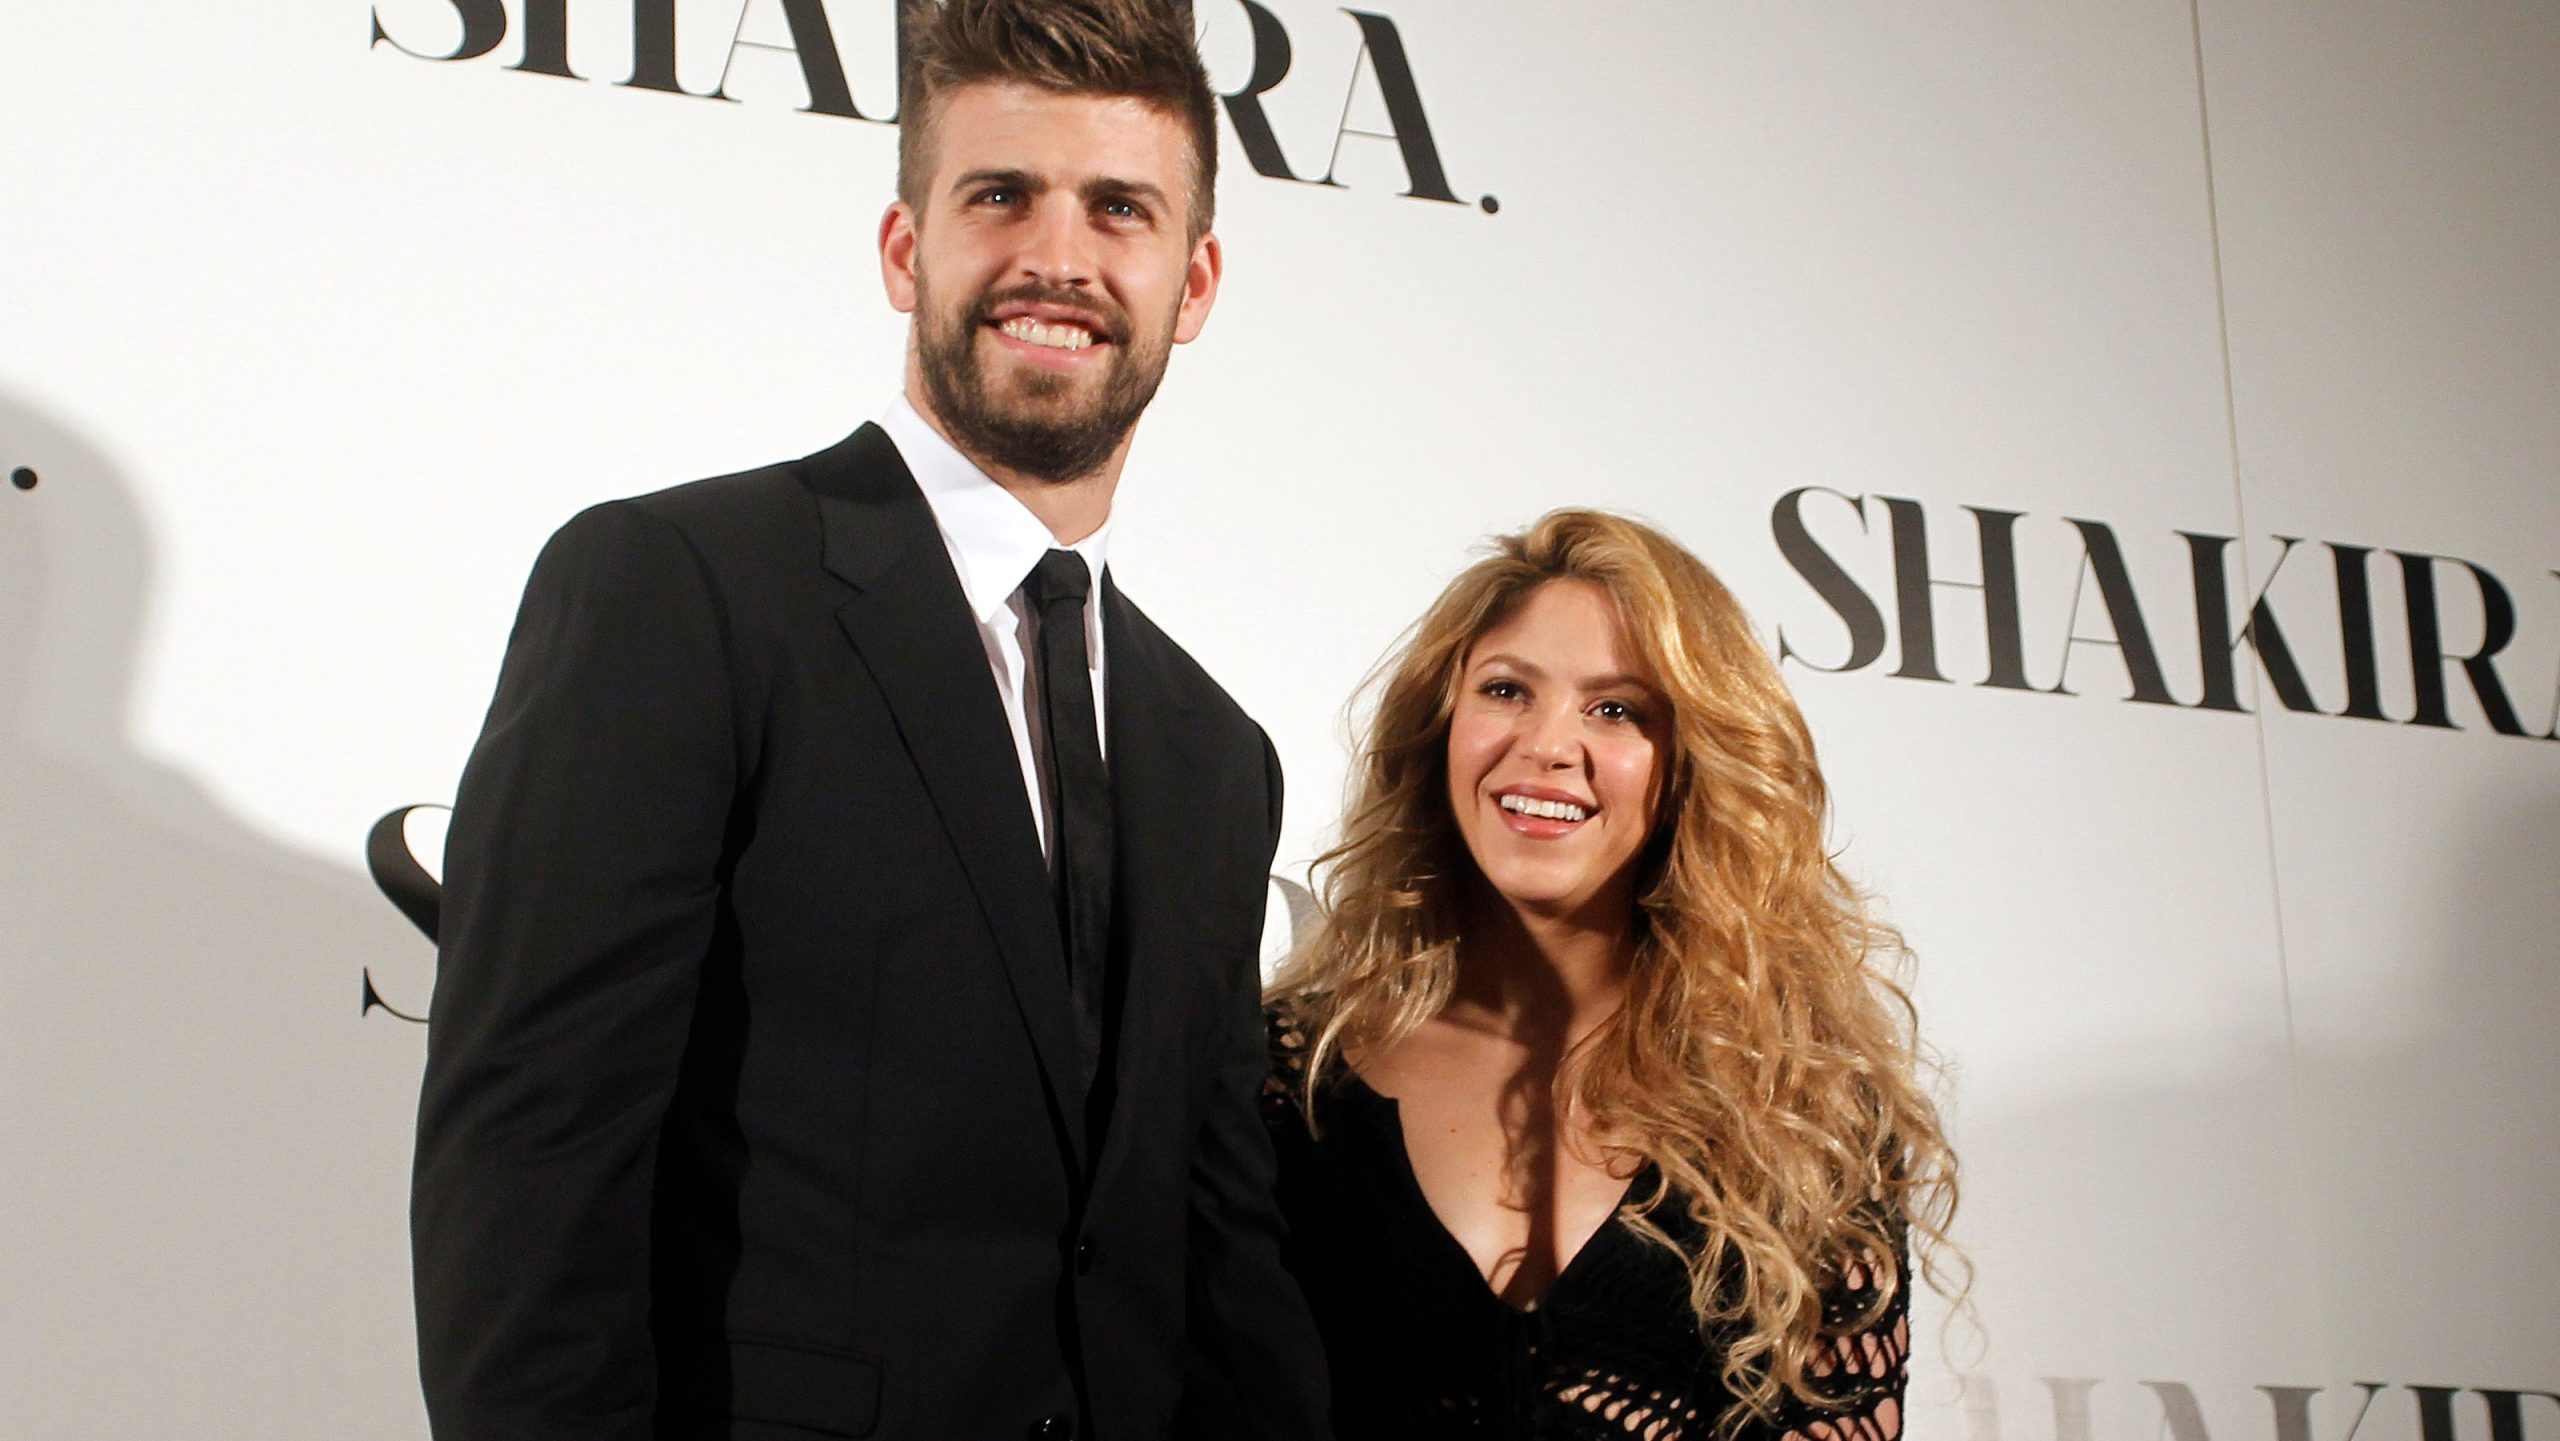 Shakira and Gerard Pique at an event